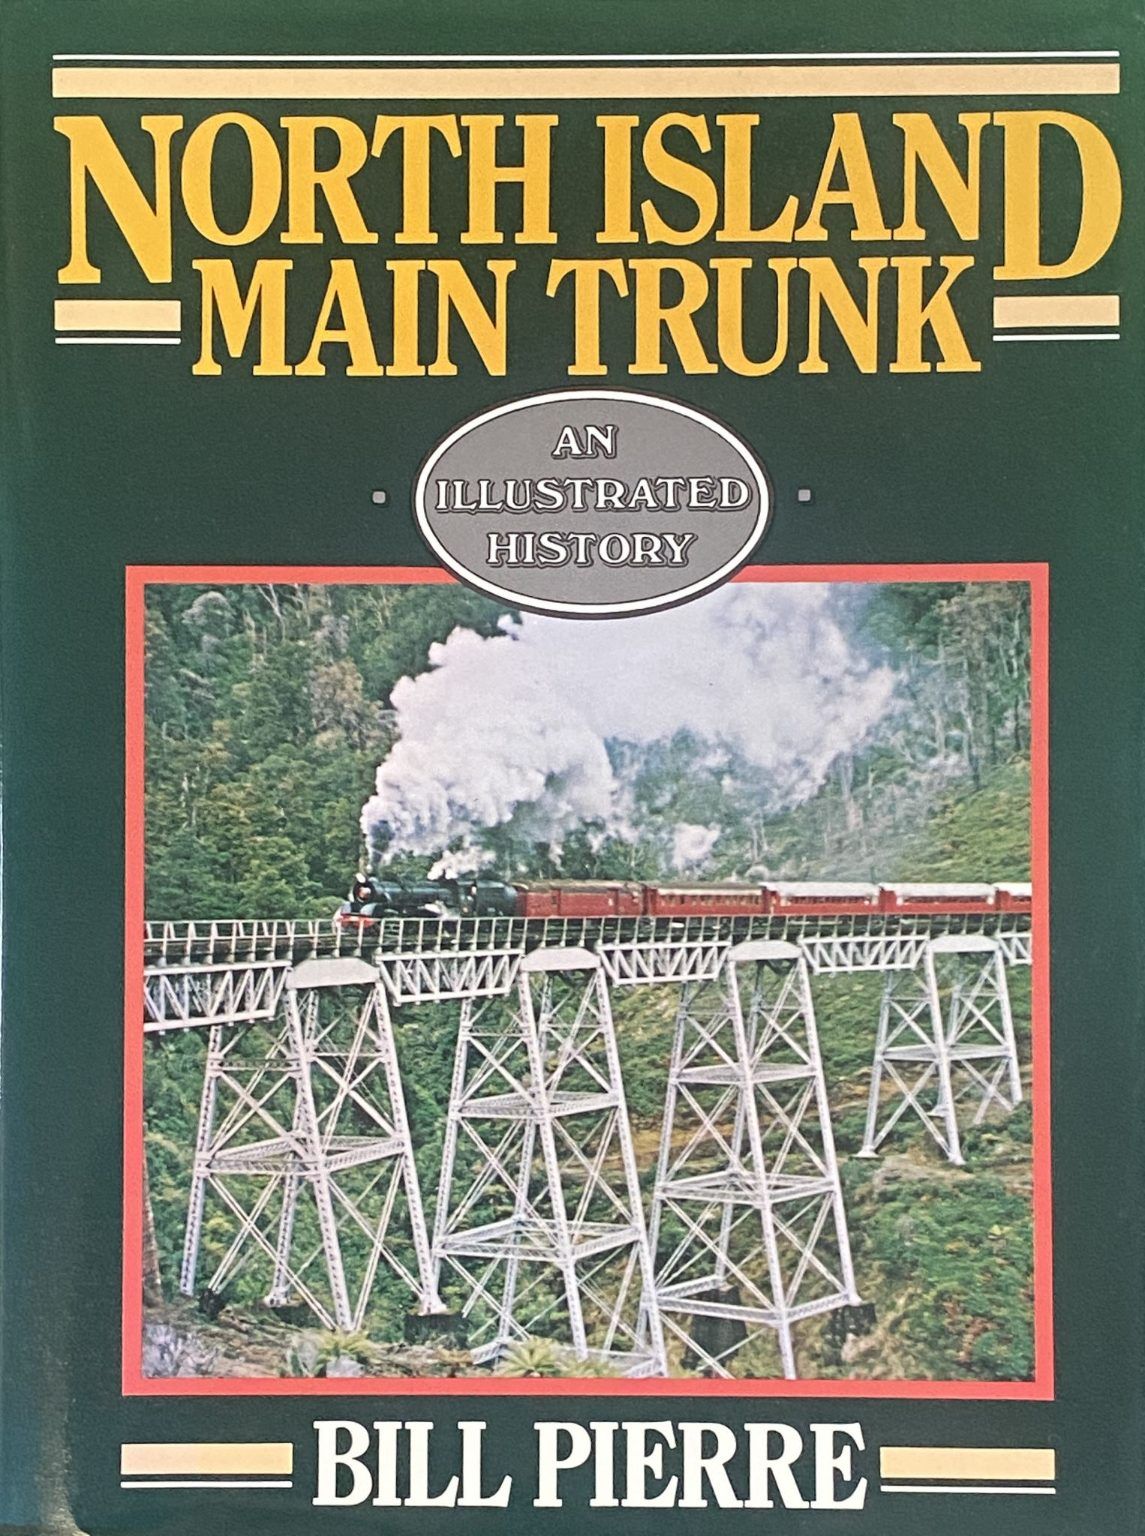 NORTH ISLAND MAIN TRUNK: An Illustrated History